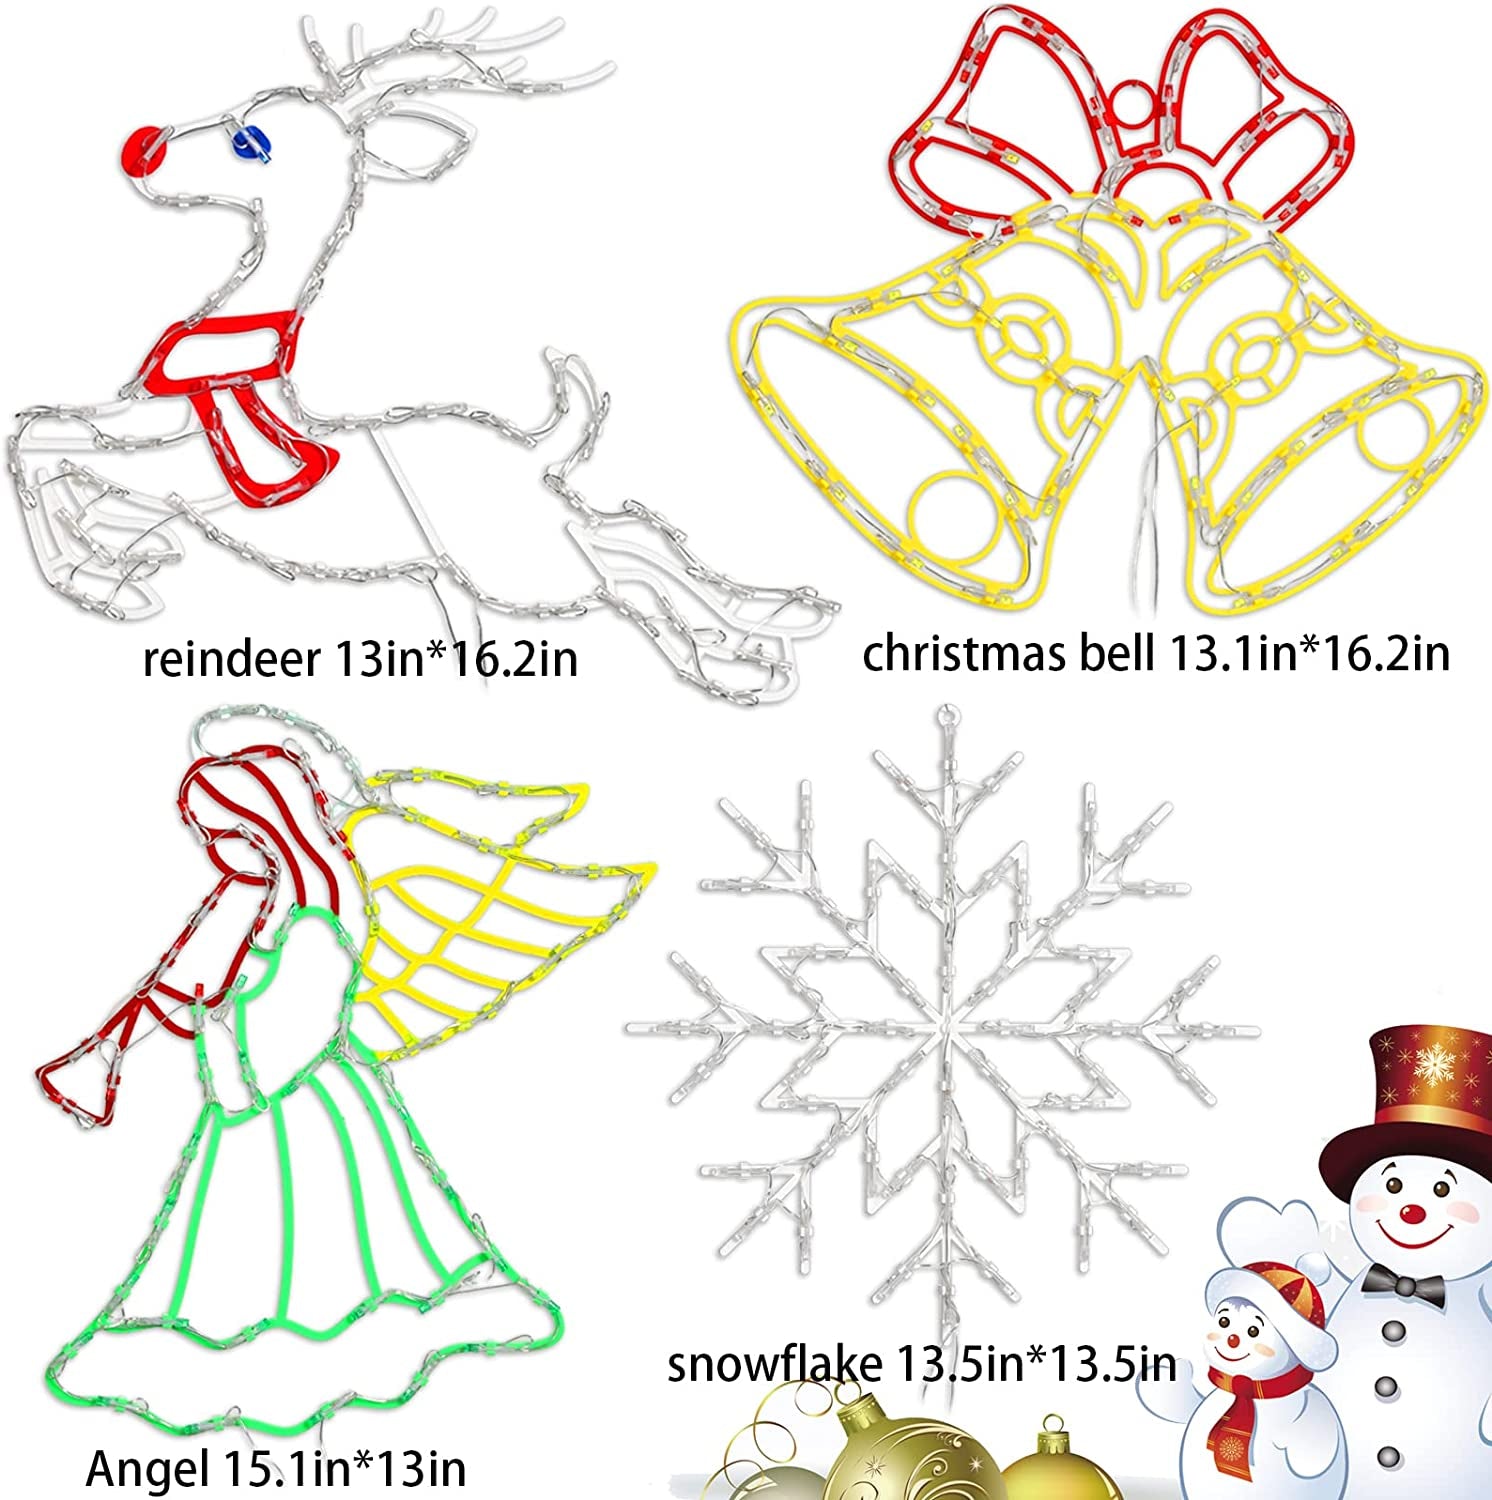 Christmas Window Silhouette Lights Decorations - 16In Pack of 4 Sign Lighted Colour Reindeer Snowflake Angel Bell for Holiday Indoor Wall Door Glass Decor